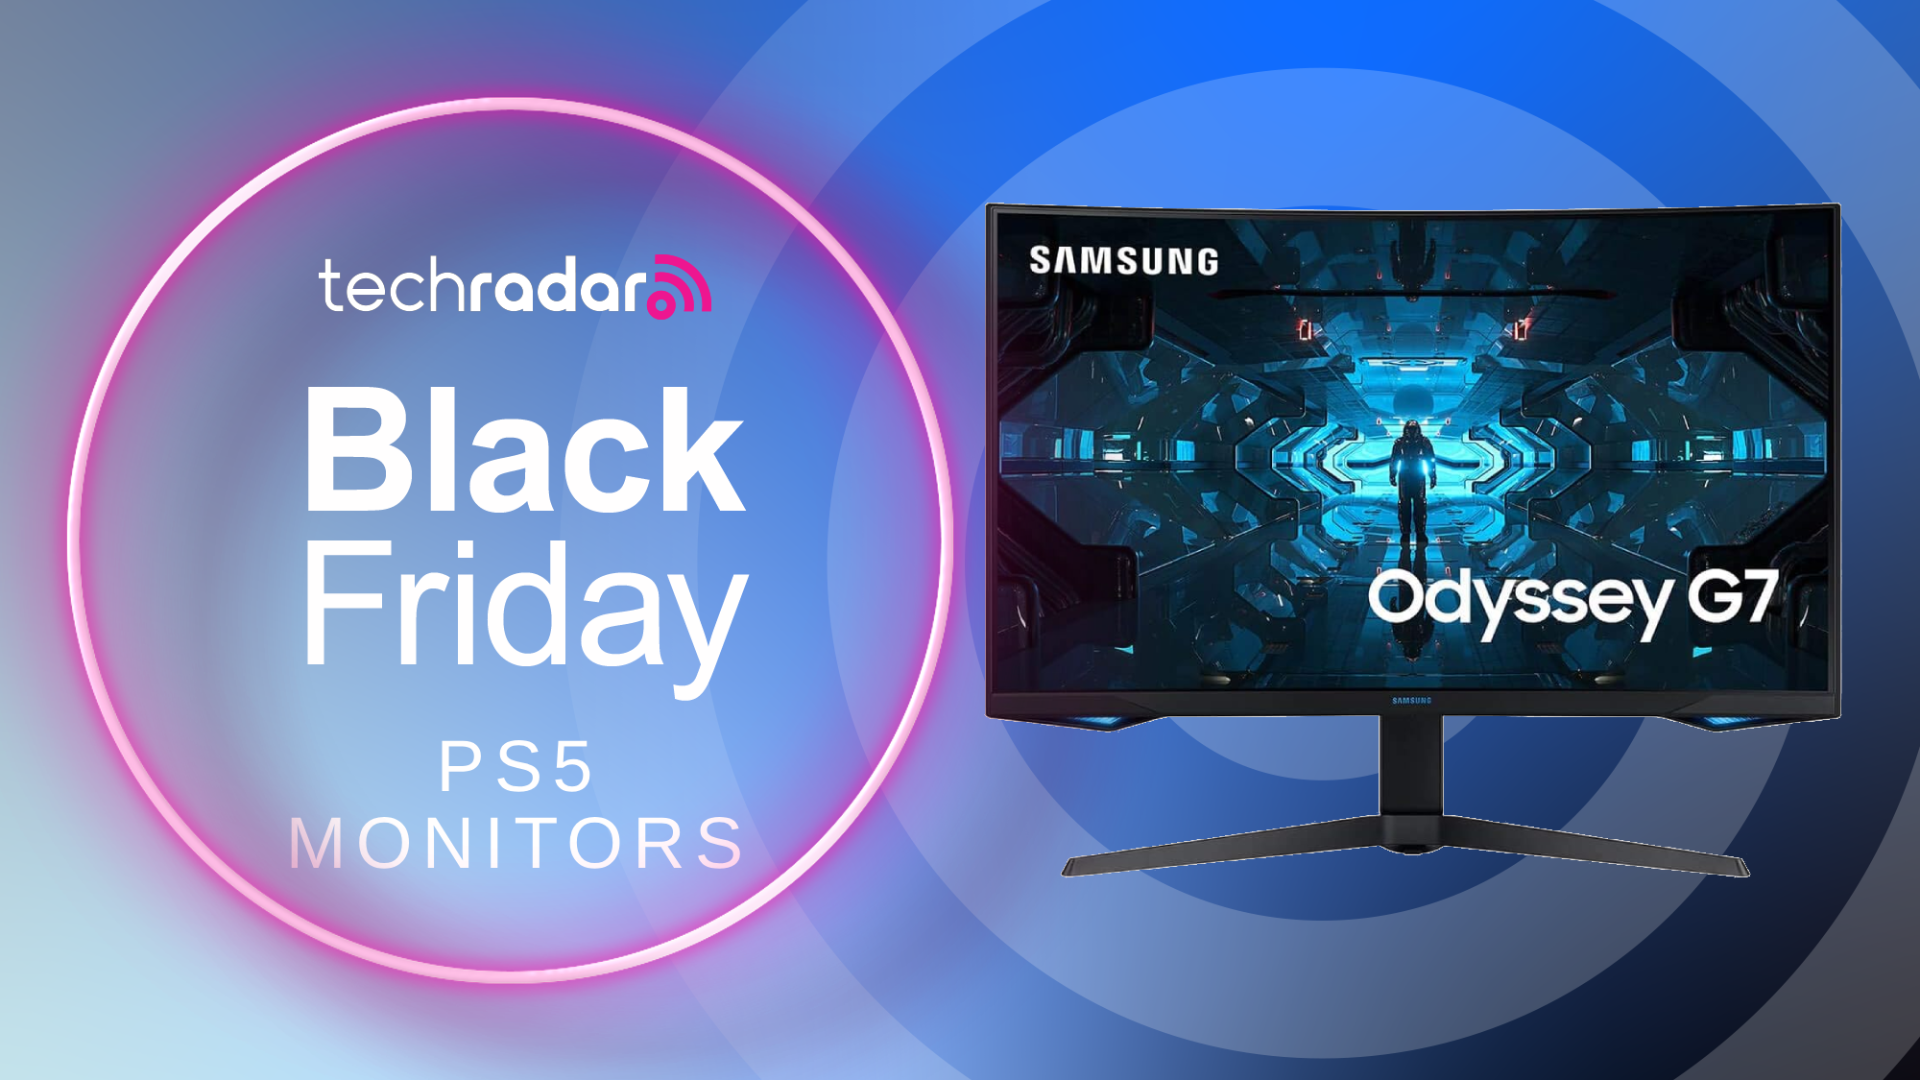 This Black Friday gaming monitor deal takes $220 off one of our favorite LG  OLED displays